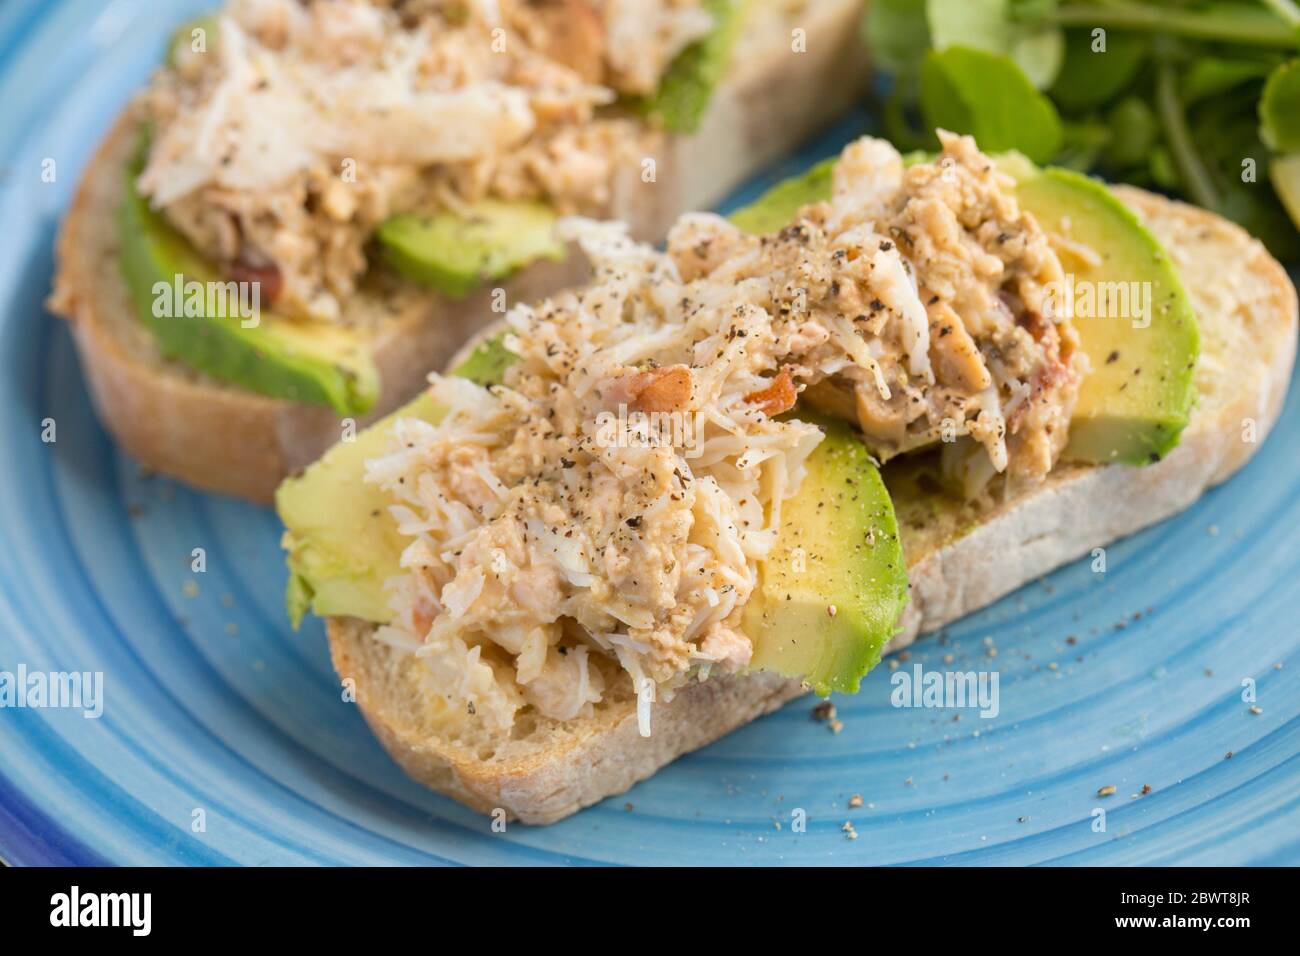 Crab sandwiches made with white and brown meat from a spider crab, Maja brachydactyla, that was caught off the Dorset coast. Served with avocado and w Stock Photo